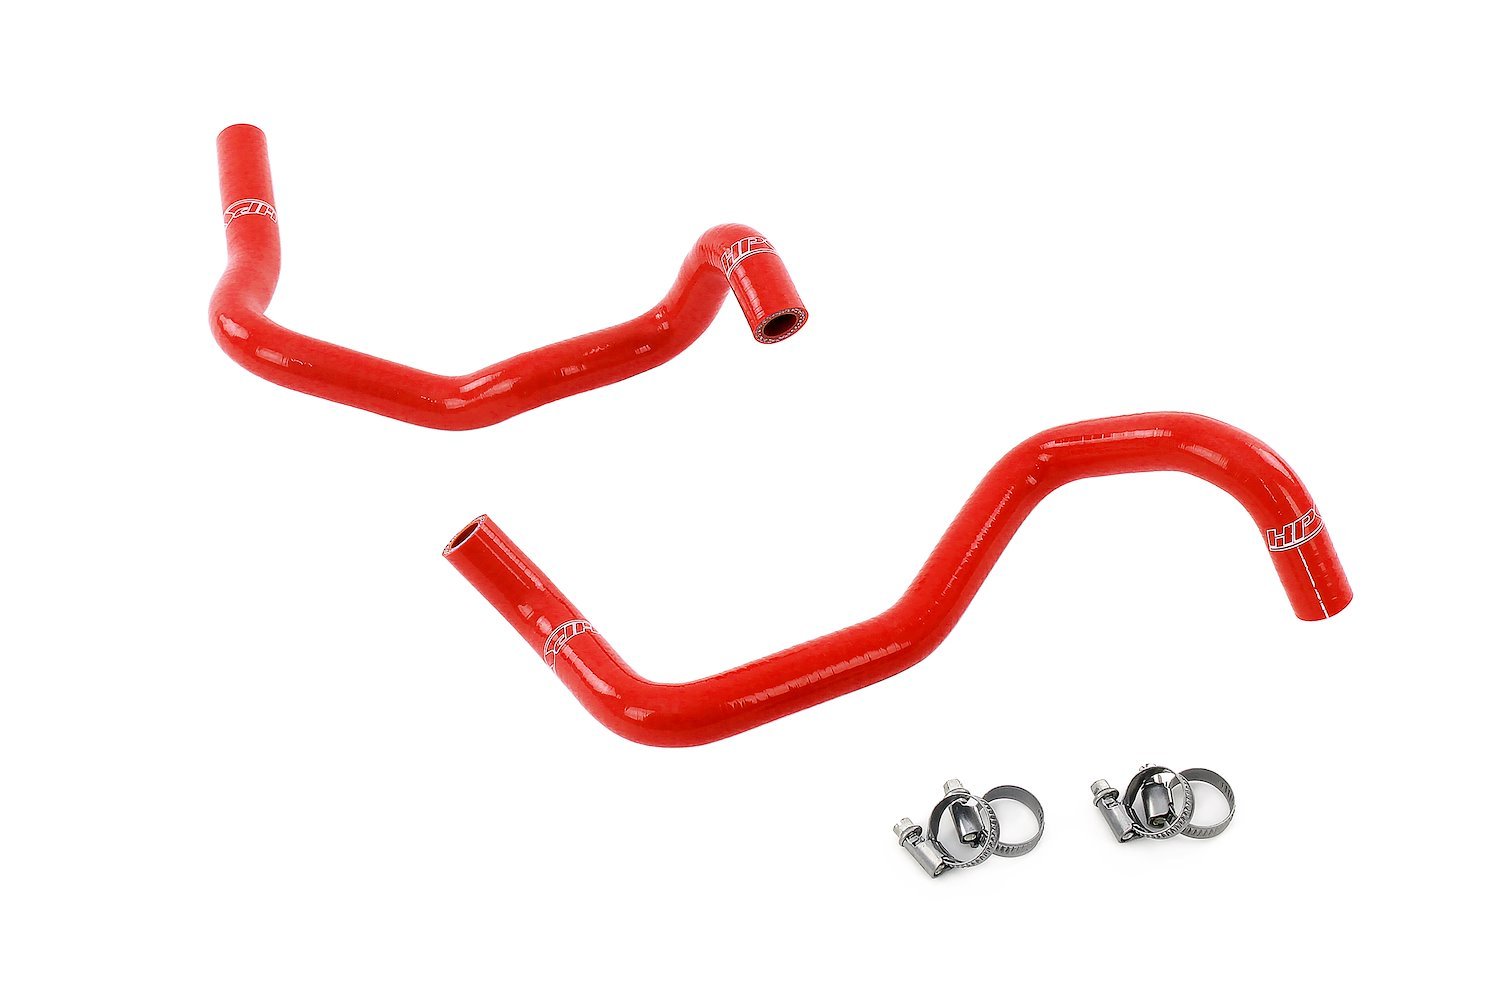 57-2131H-RED Heater Hose Kit, High-Temp 3-Ply Reinforced Silicone, Replaces OEM Rubber Heater Hoses